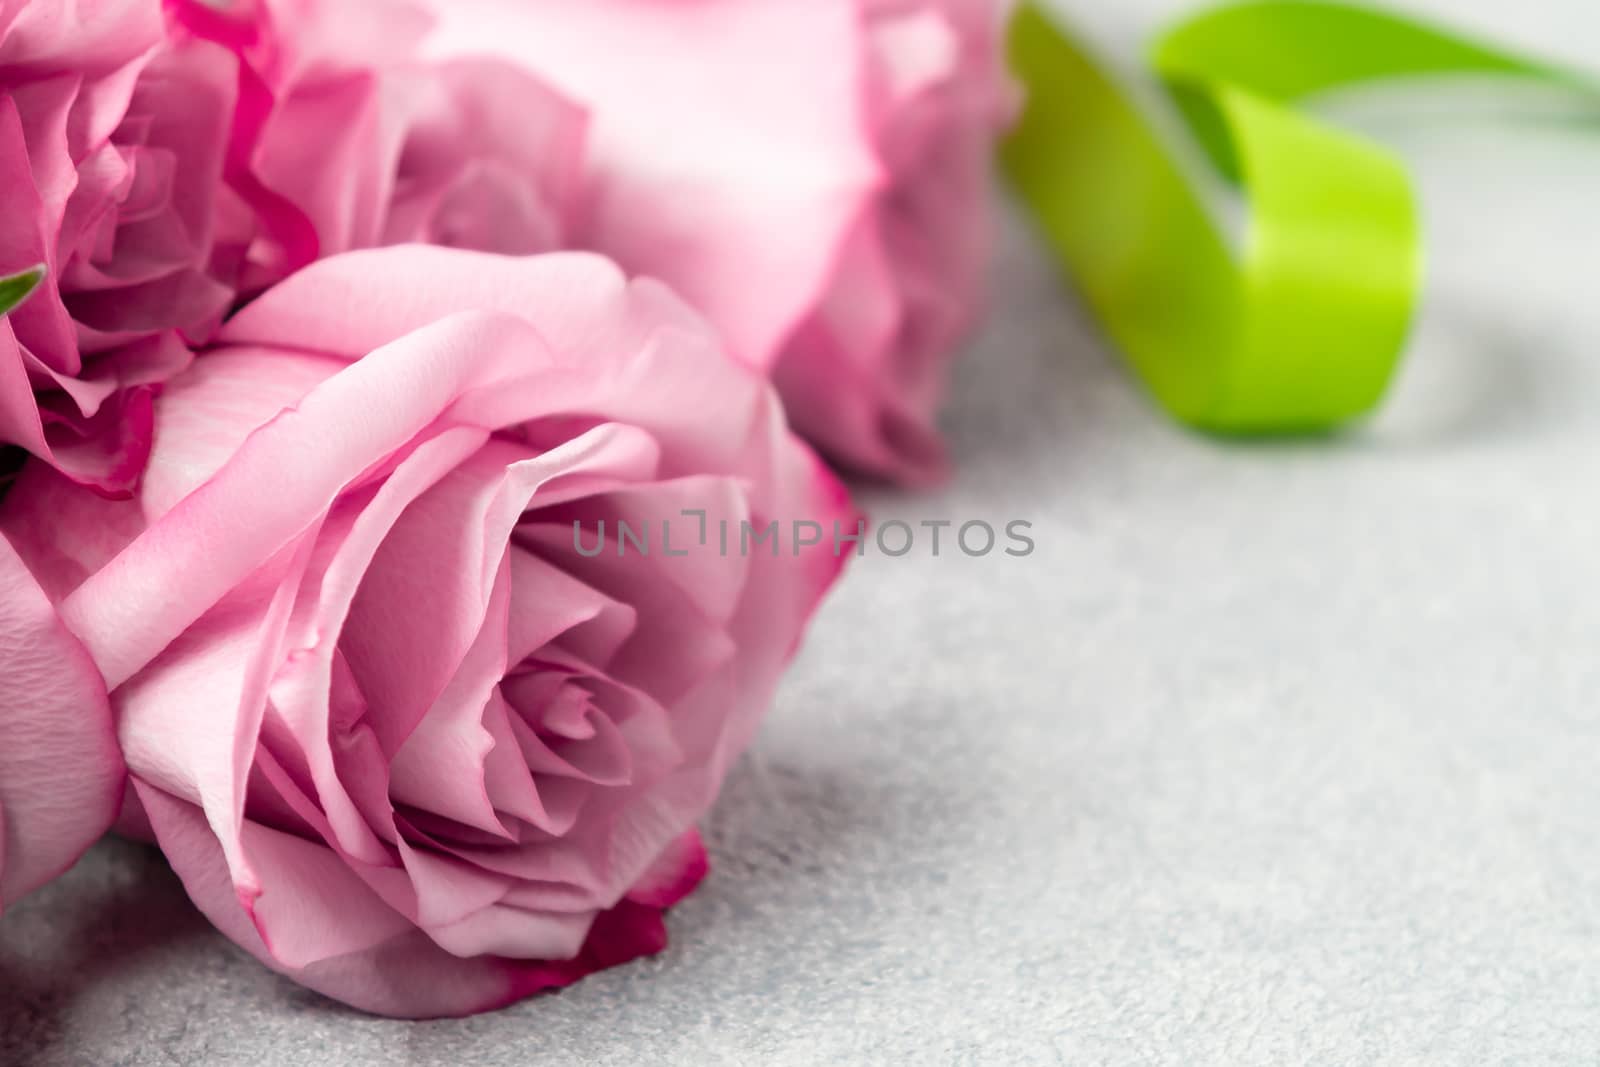 Flower arrangement - a bouquet of pink roses on a concrete surface, template for design or greeting card, place for text, copy space.